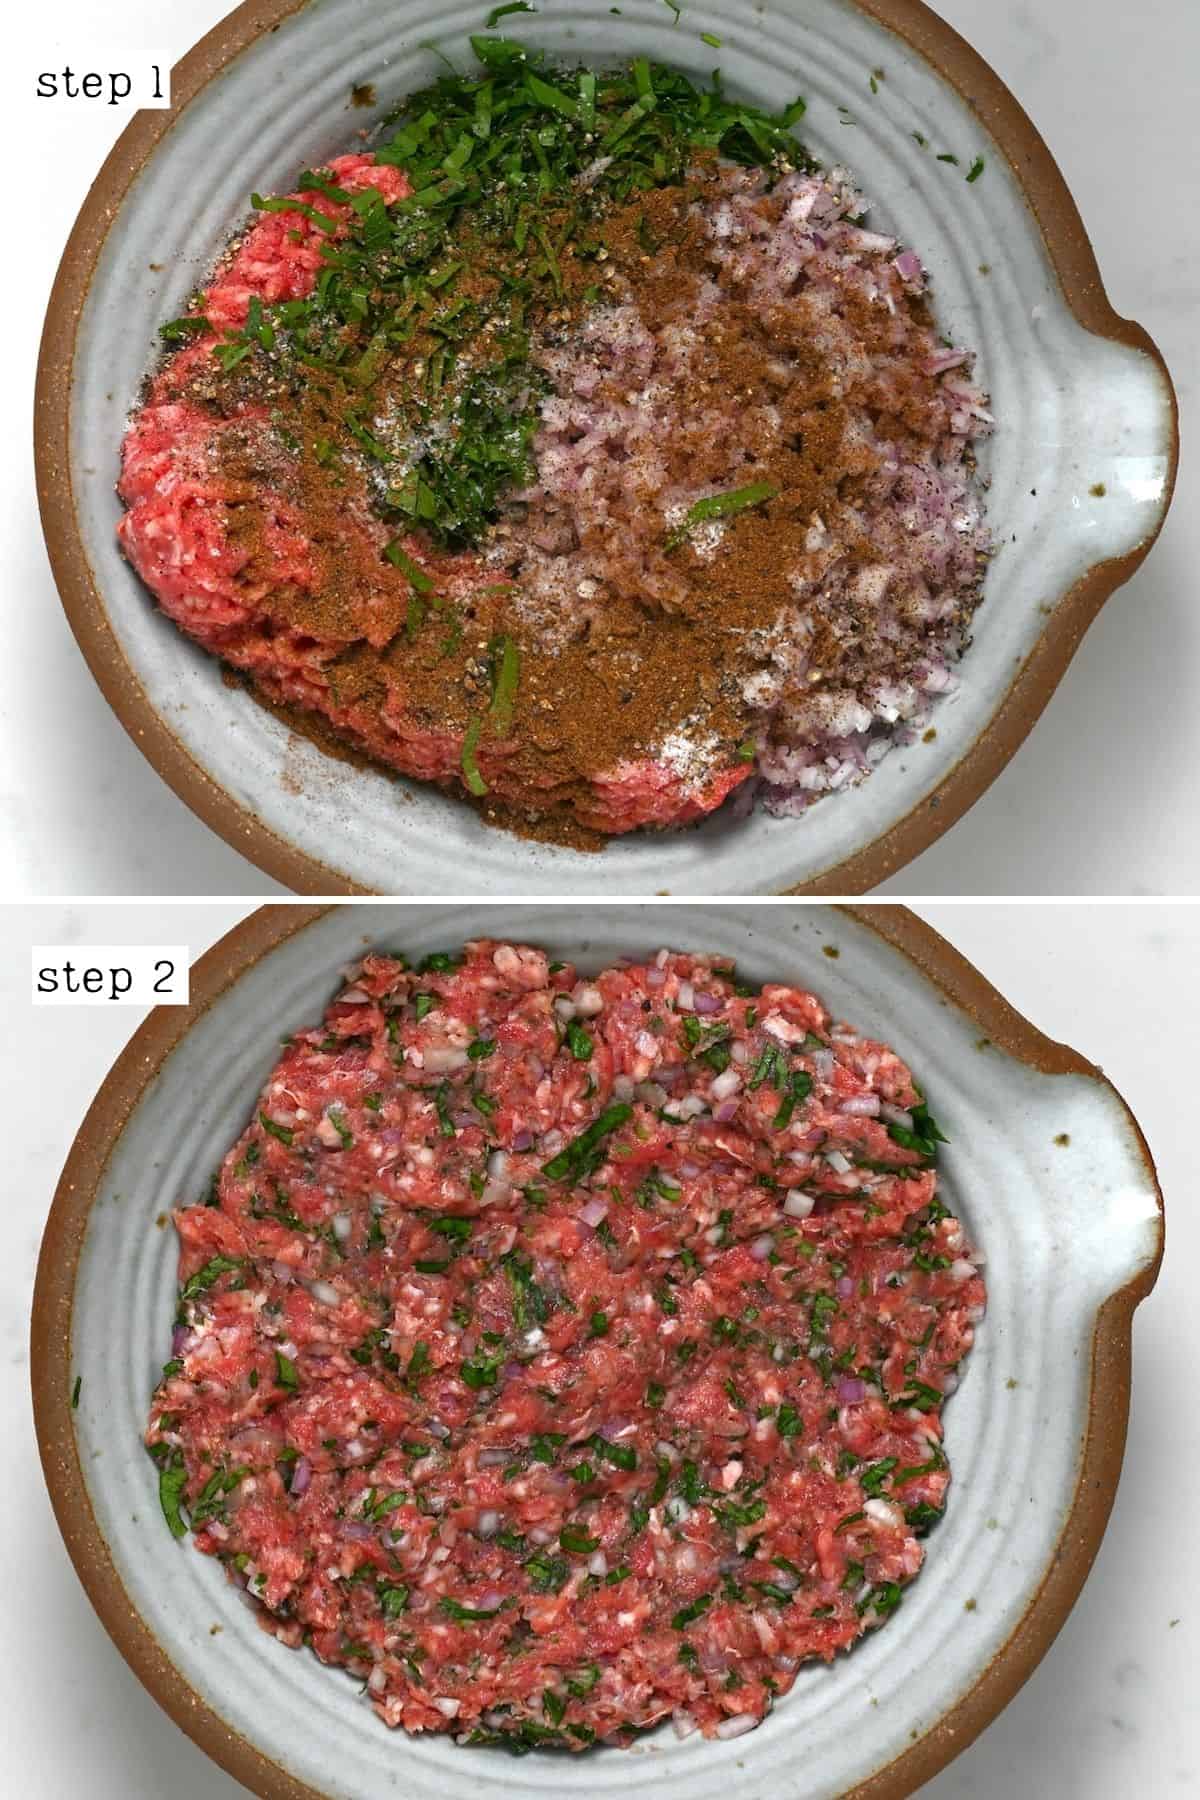 Steps for mixing minced meat and spice for kofta